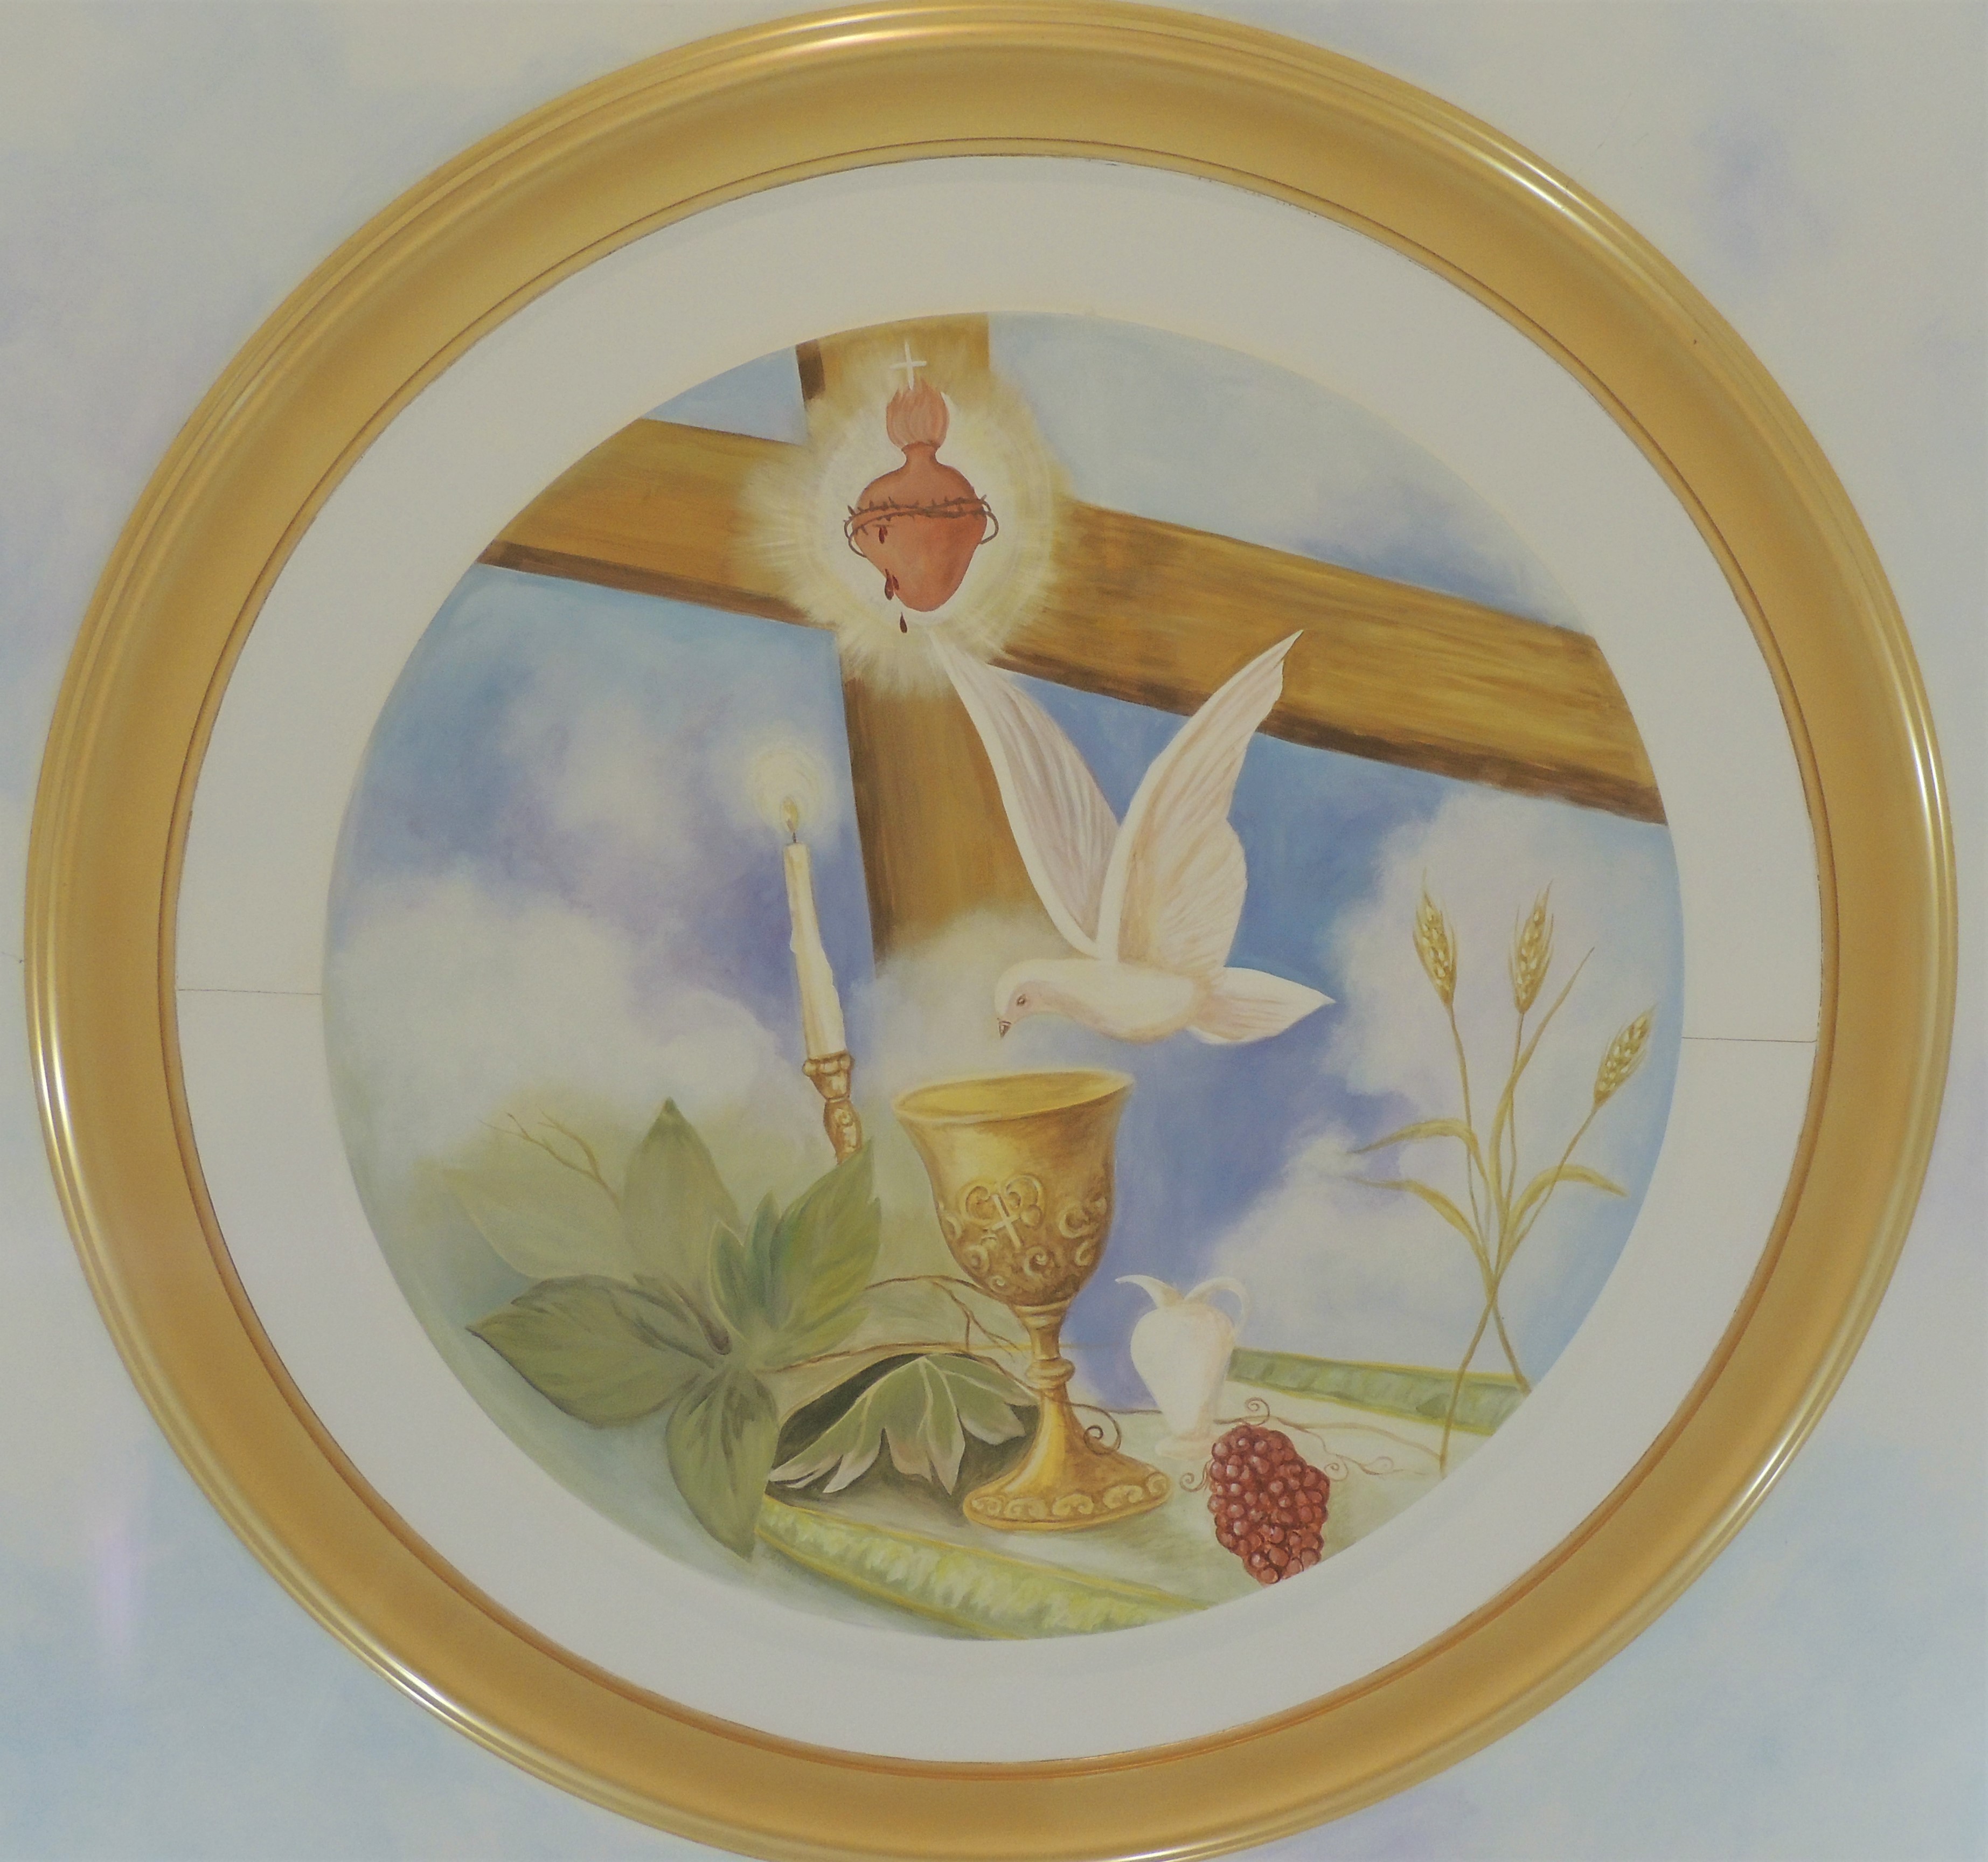 Mural above altar: sacred heart, dove, cross, chalice, jug, wheat, grapes, candle, vine